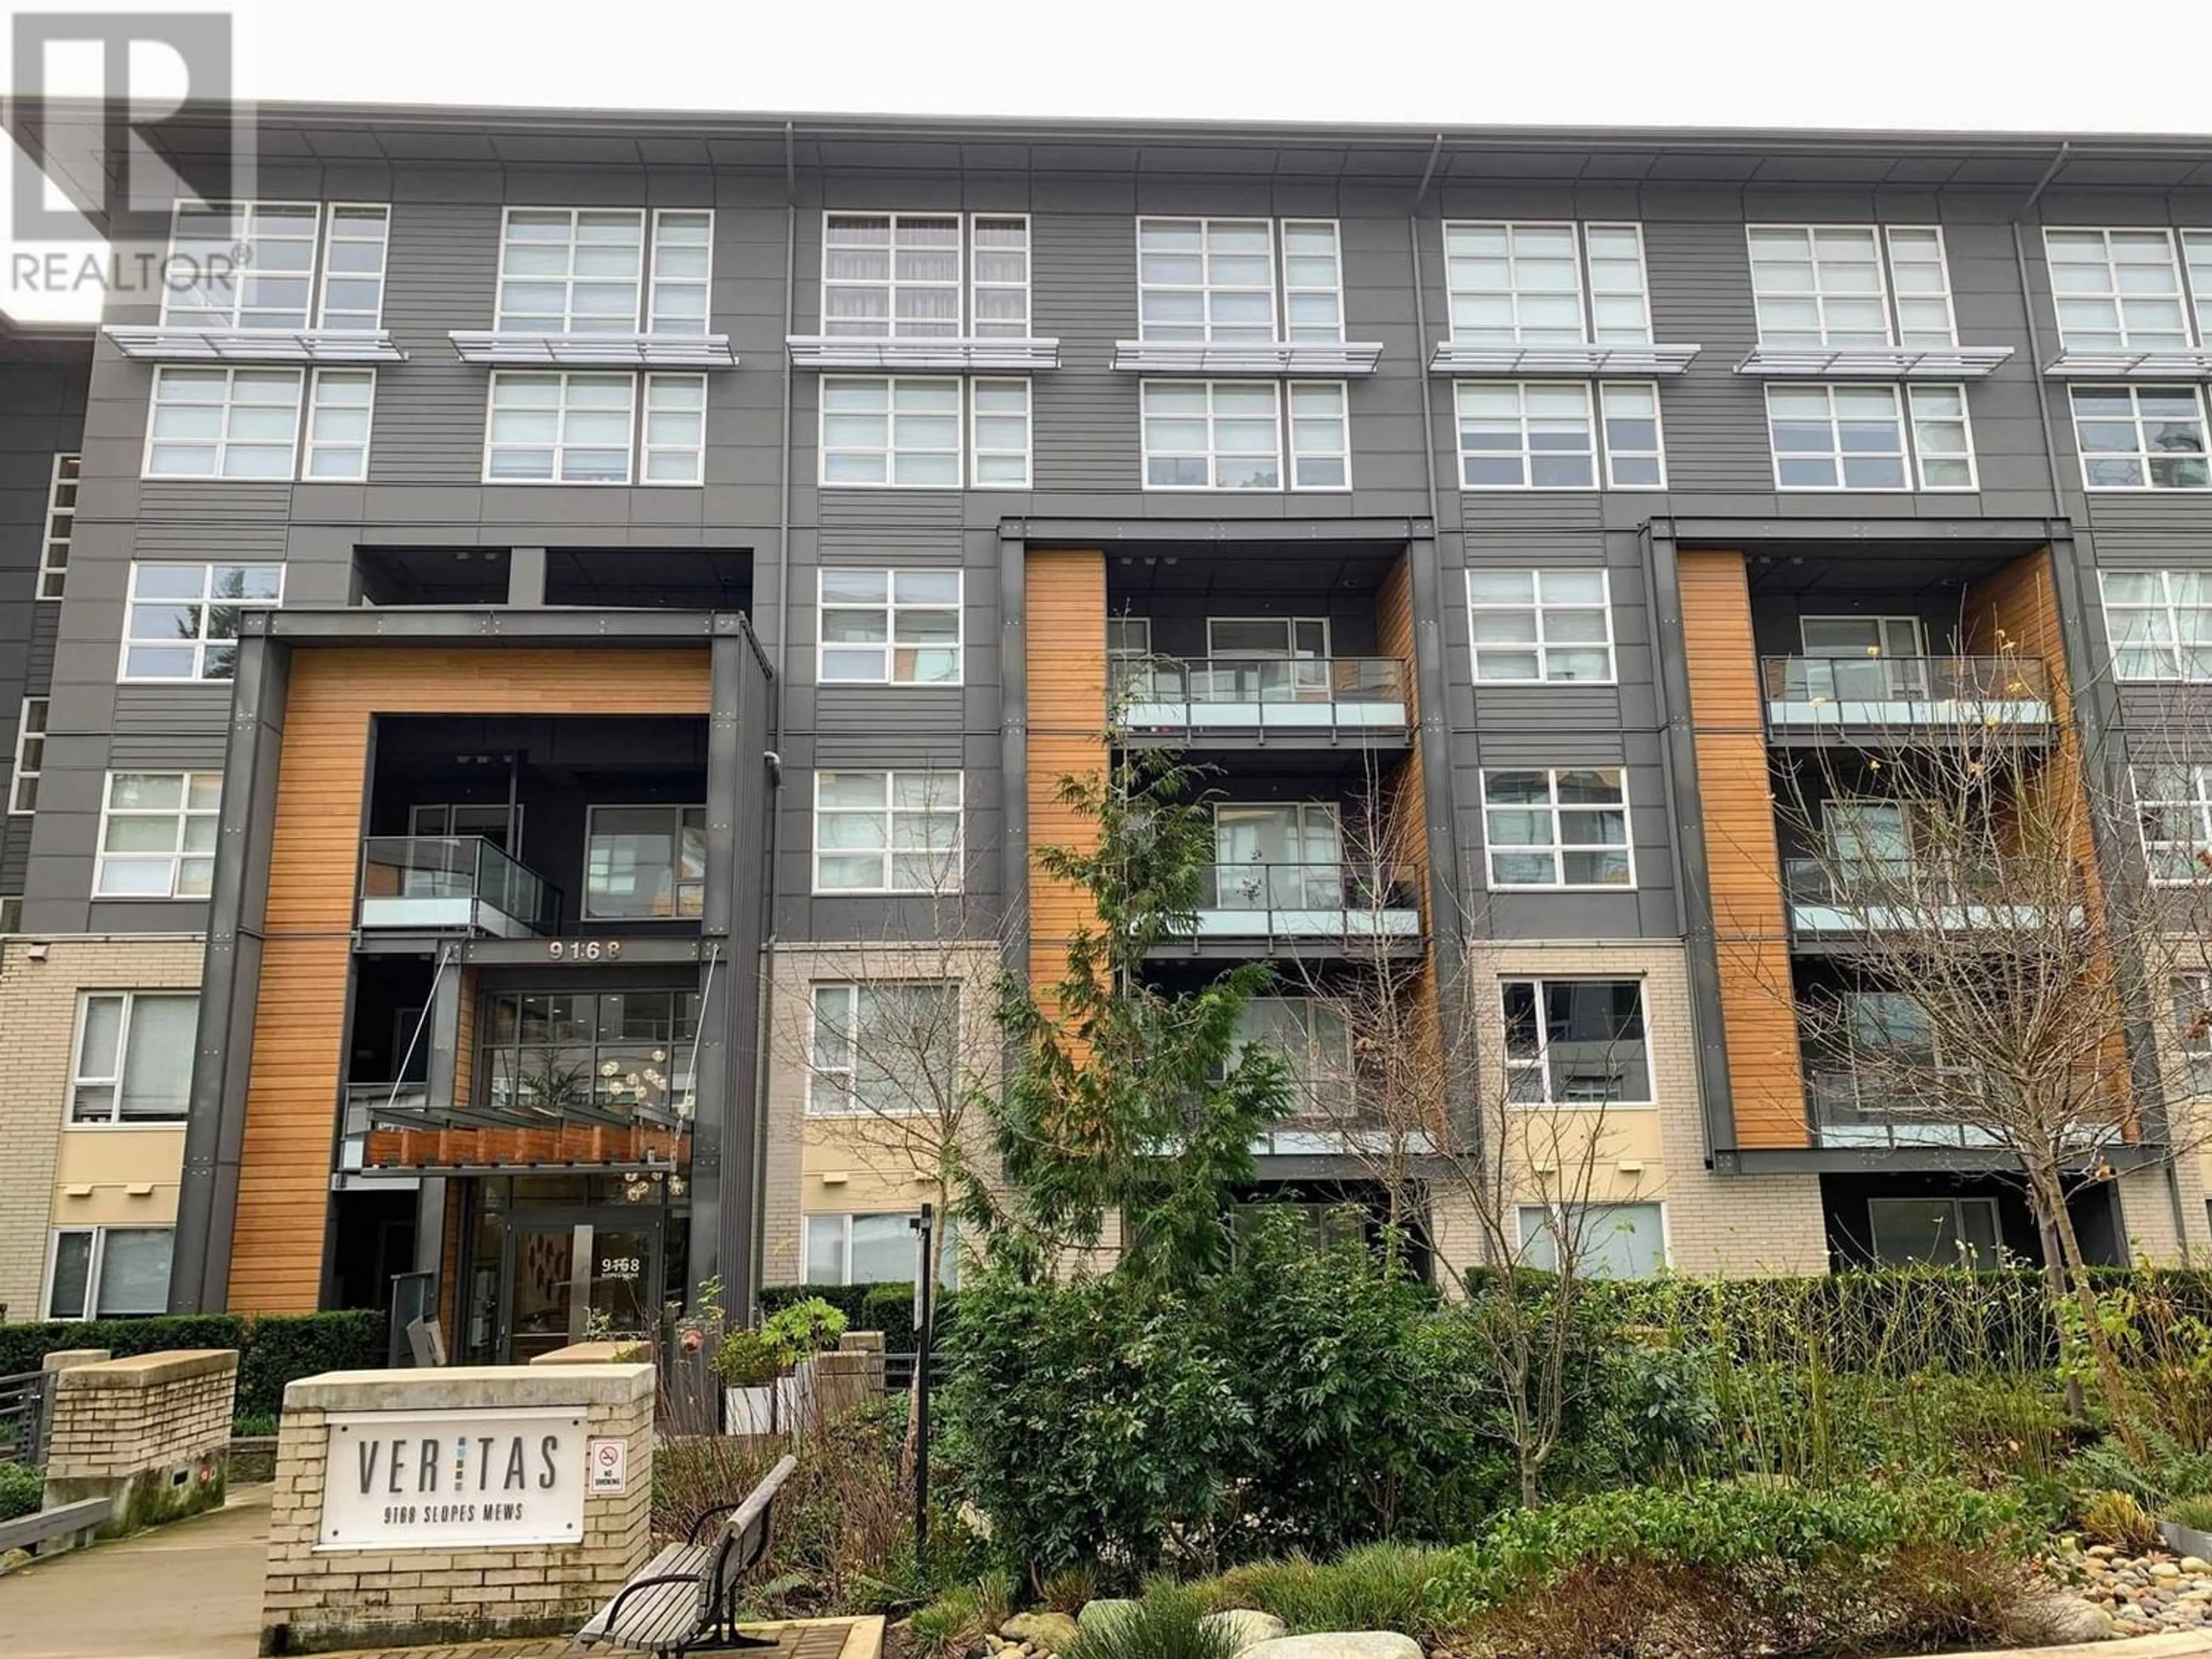 A pic from exterior of the house or condo for 401 9168 SLOPES MEWS, Burnaby British Columbia V5A0E4